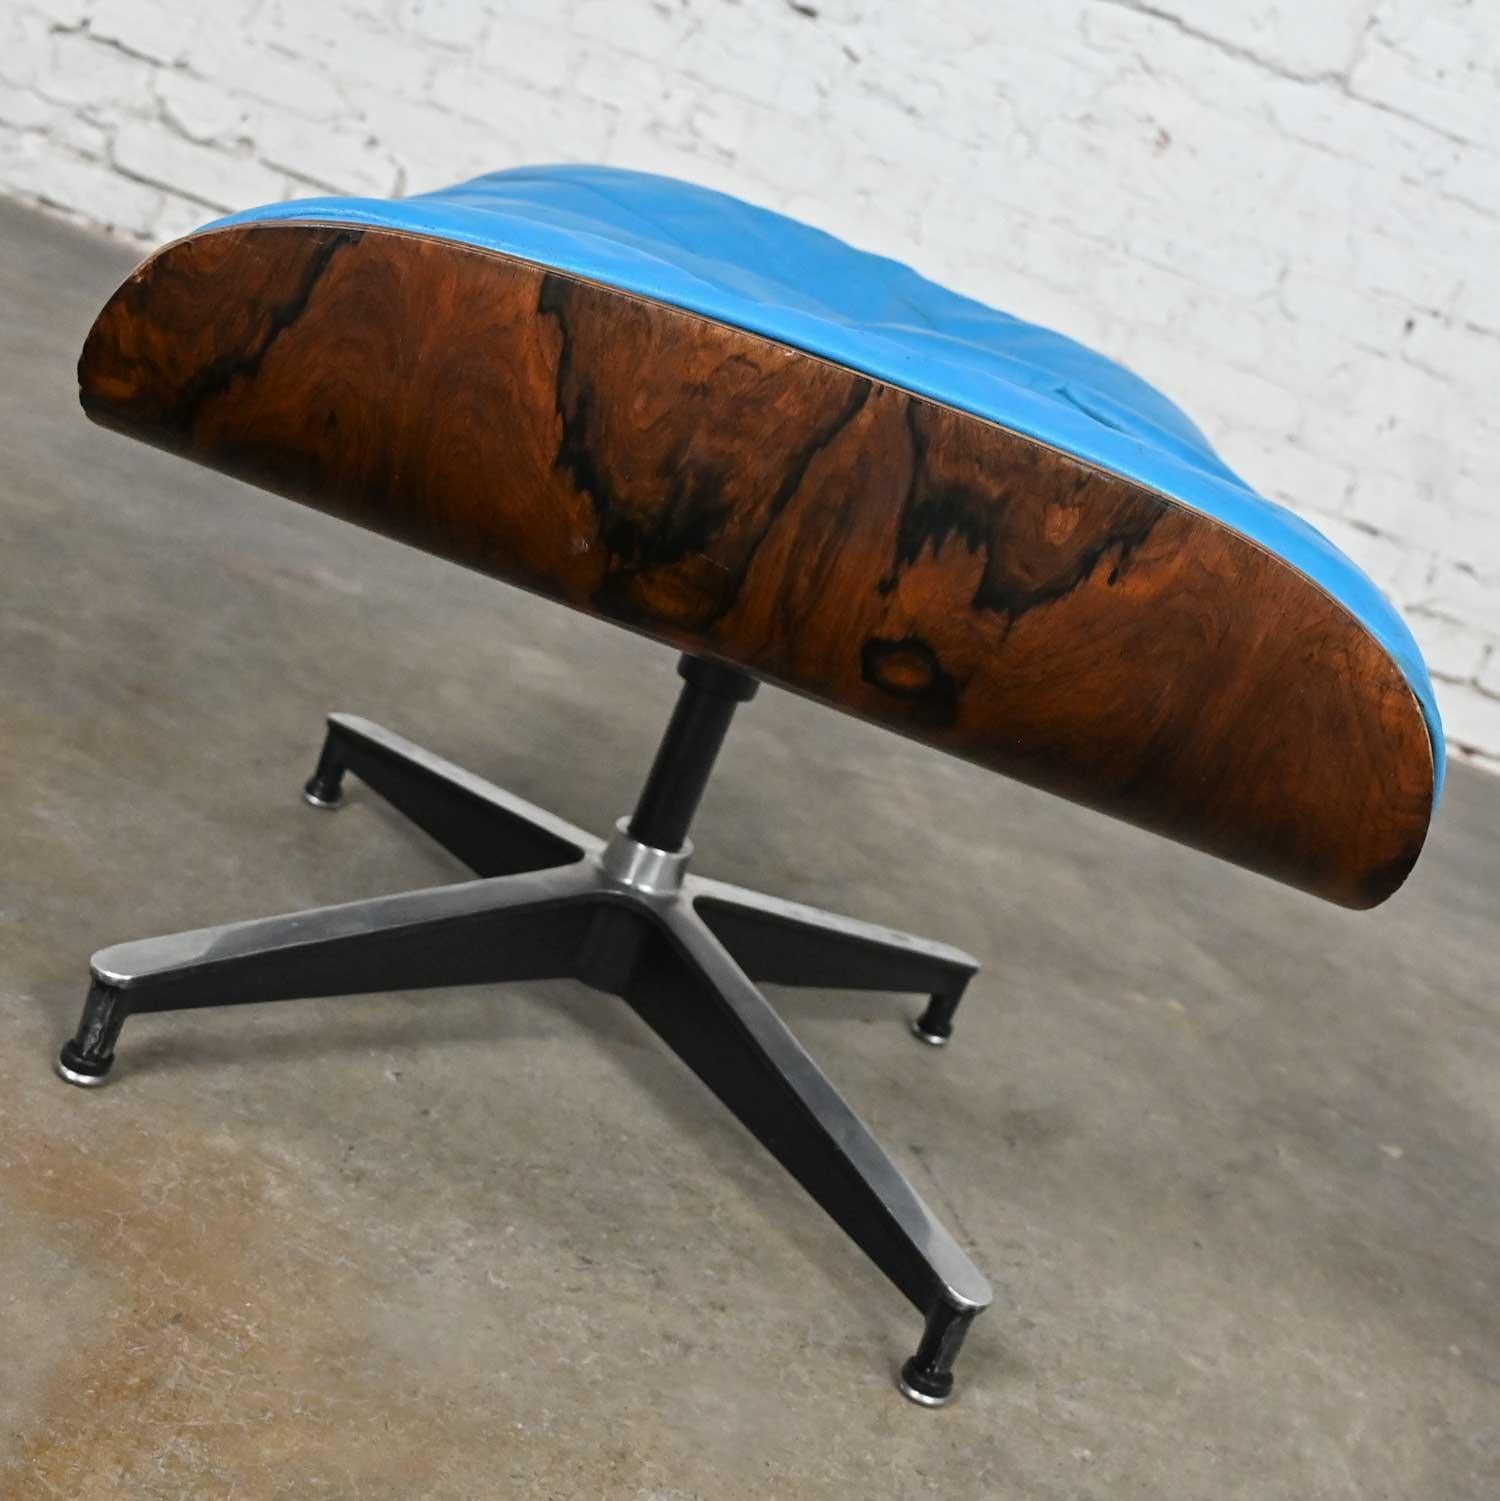 Eames 670 Lounge Chair 671 Ottoman Blue Leather Walnut Rosewood Herman Miller 4